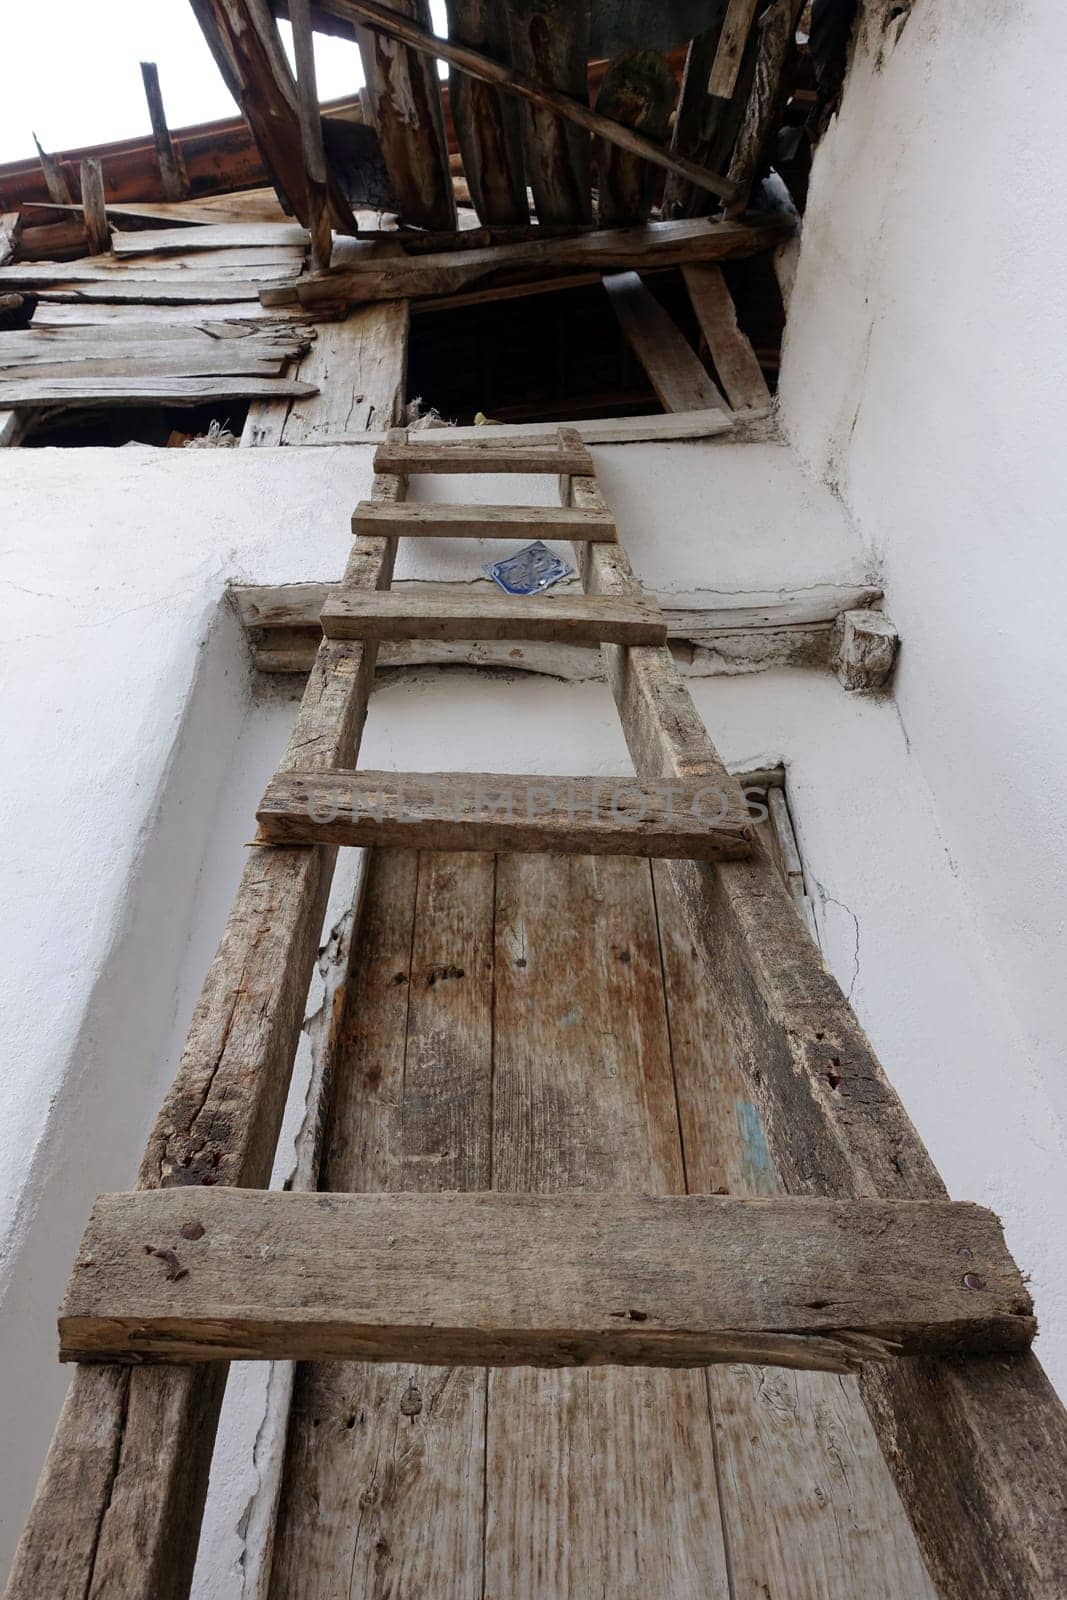 classic handmade wooden ladder for climbing on the roof,The old village house and the wooden ladder placed on its roof, by nhatipoglu